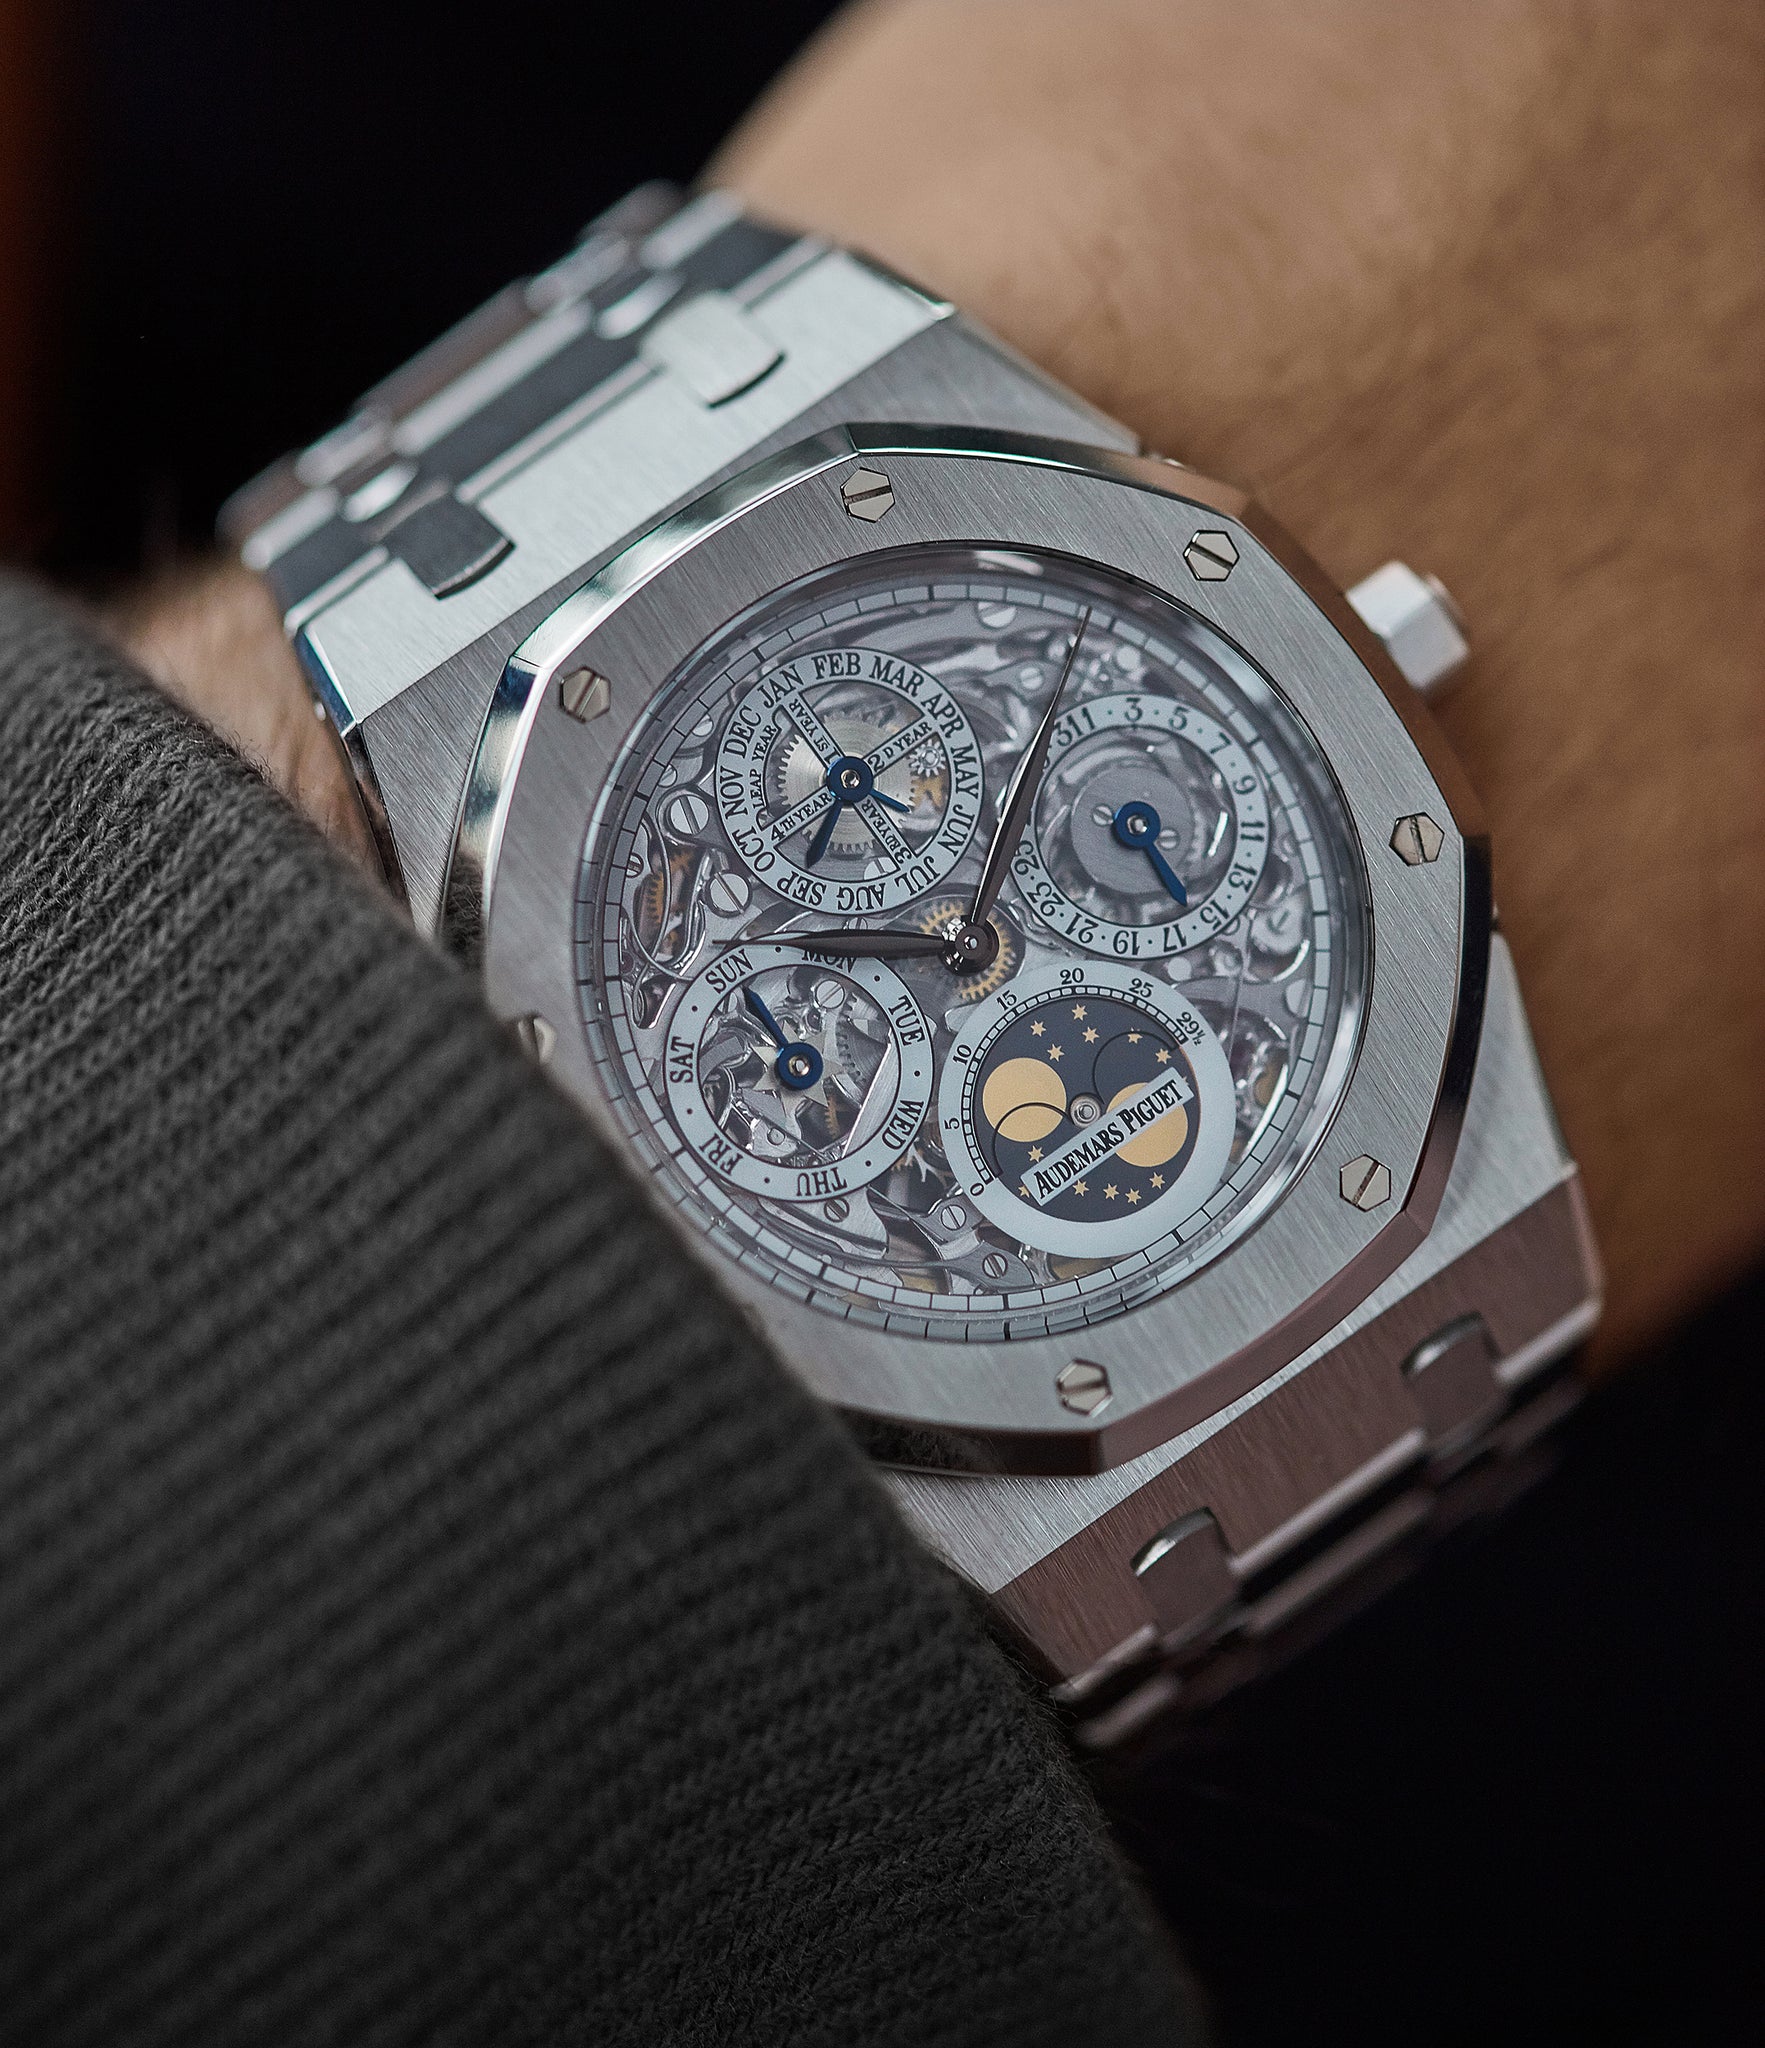 find Audemars Piguet Royal Oak 25829PT perpetual calendar skeleton dial platinum full set pre-owned watch for sale online at A Collected Man London UK specialist of rare watches